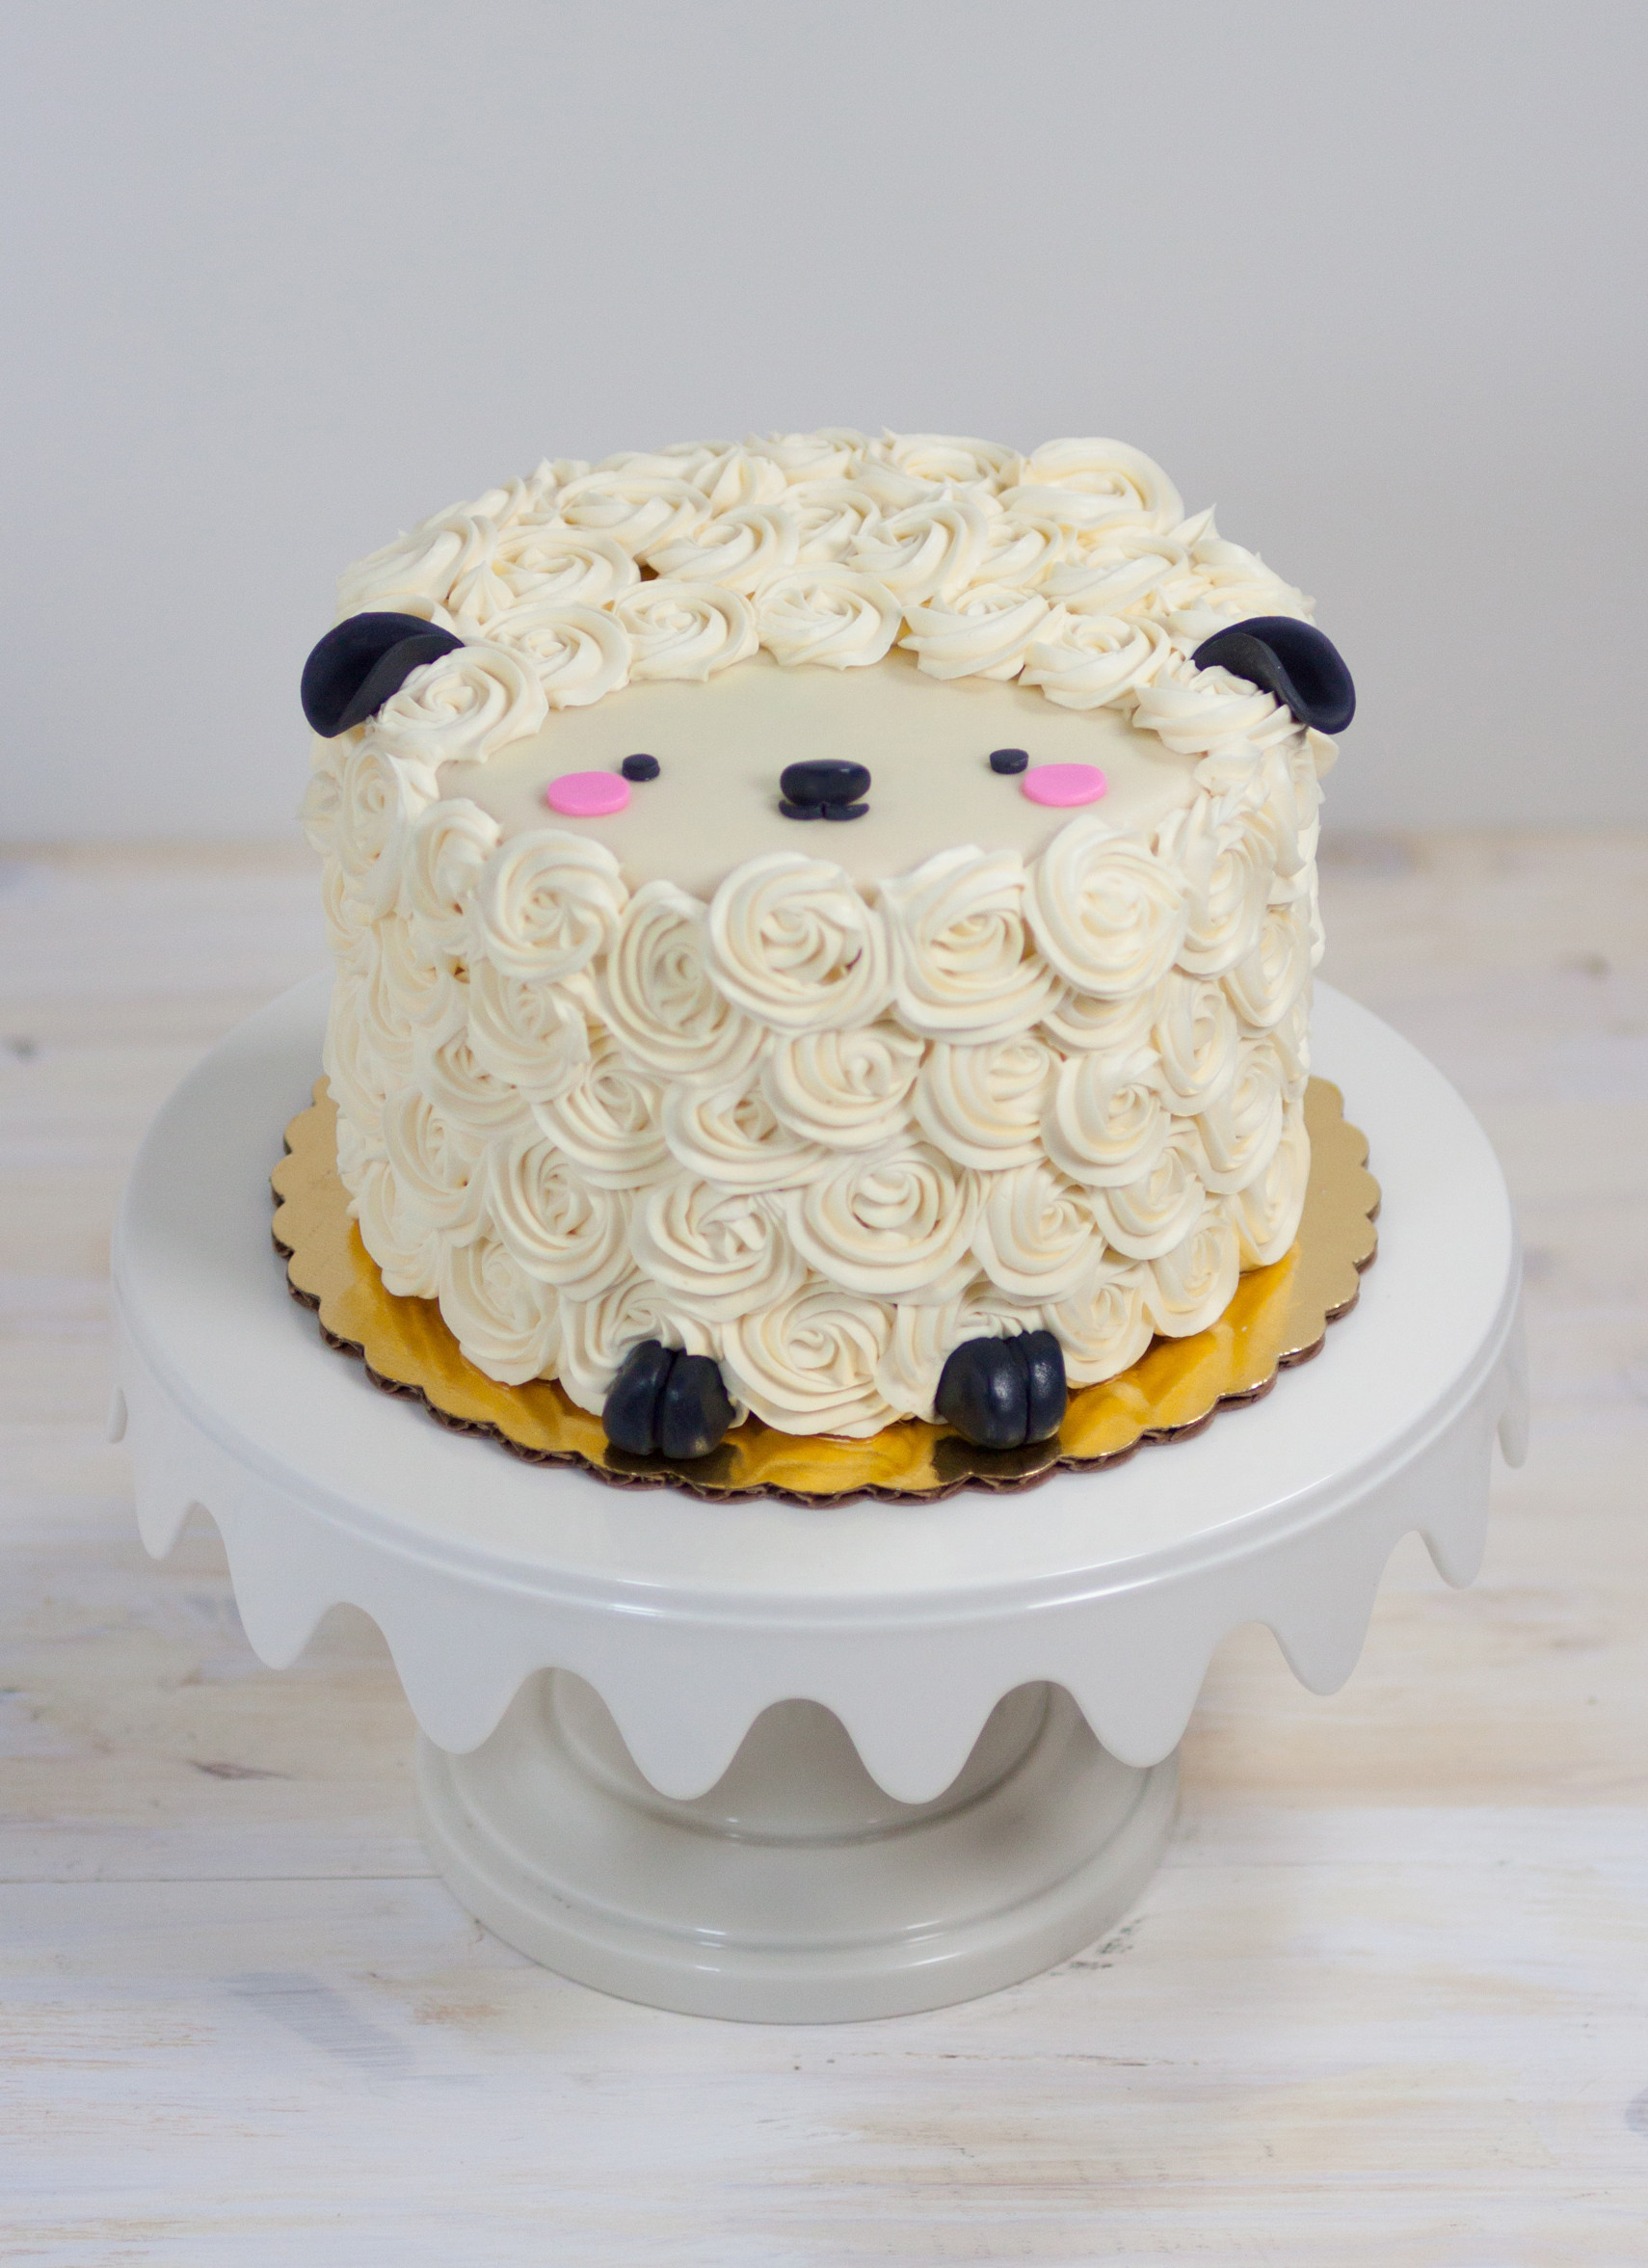 Cute Birthday Cakes
 Lois the Lamb Mini cake by Whipped Bakeshop